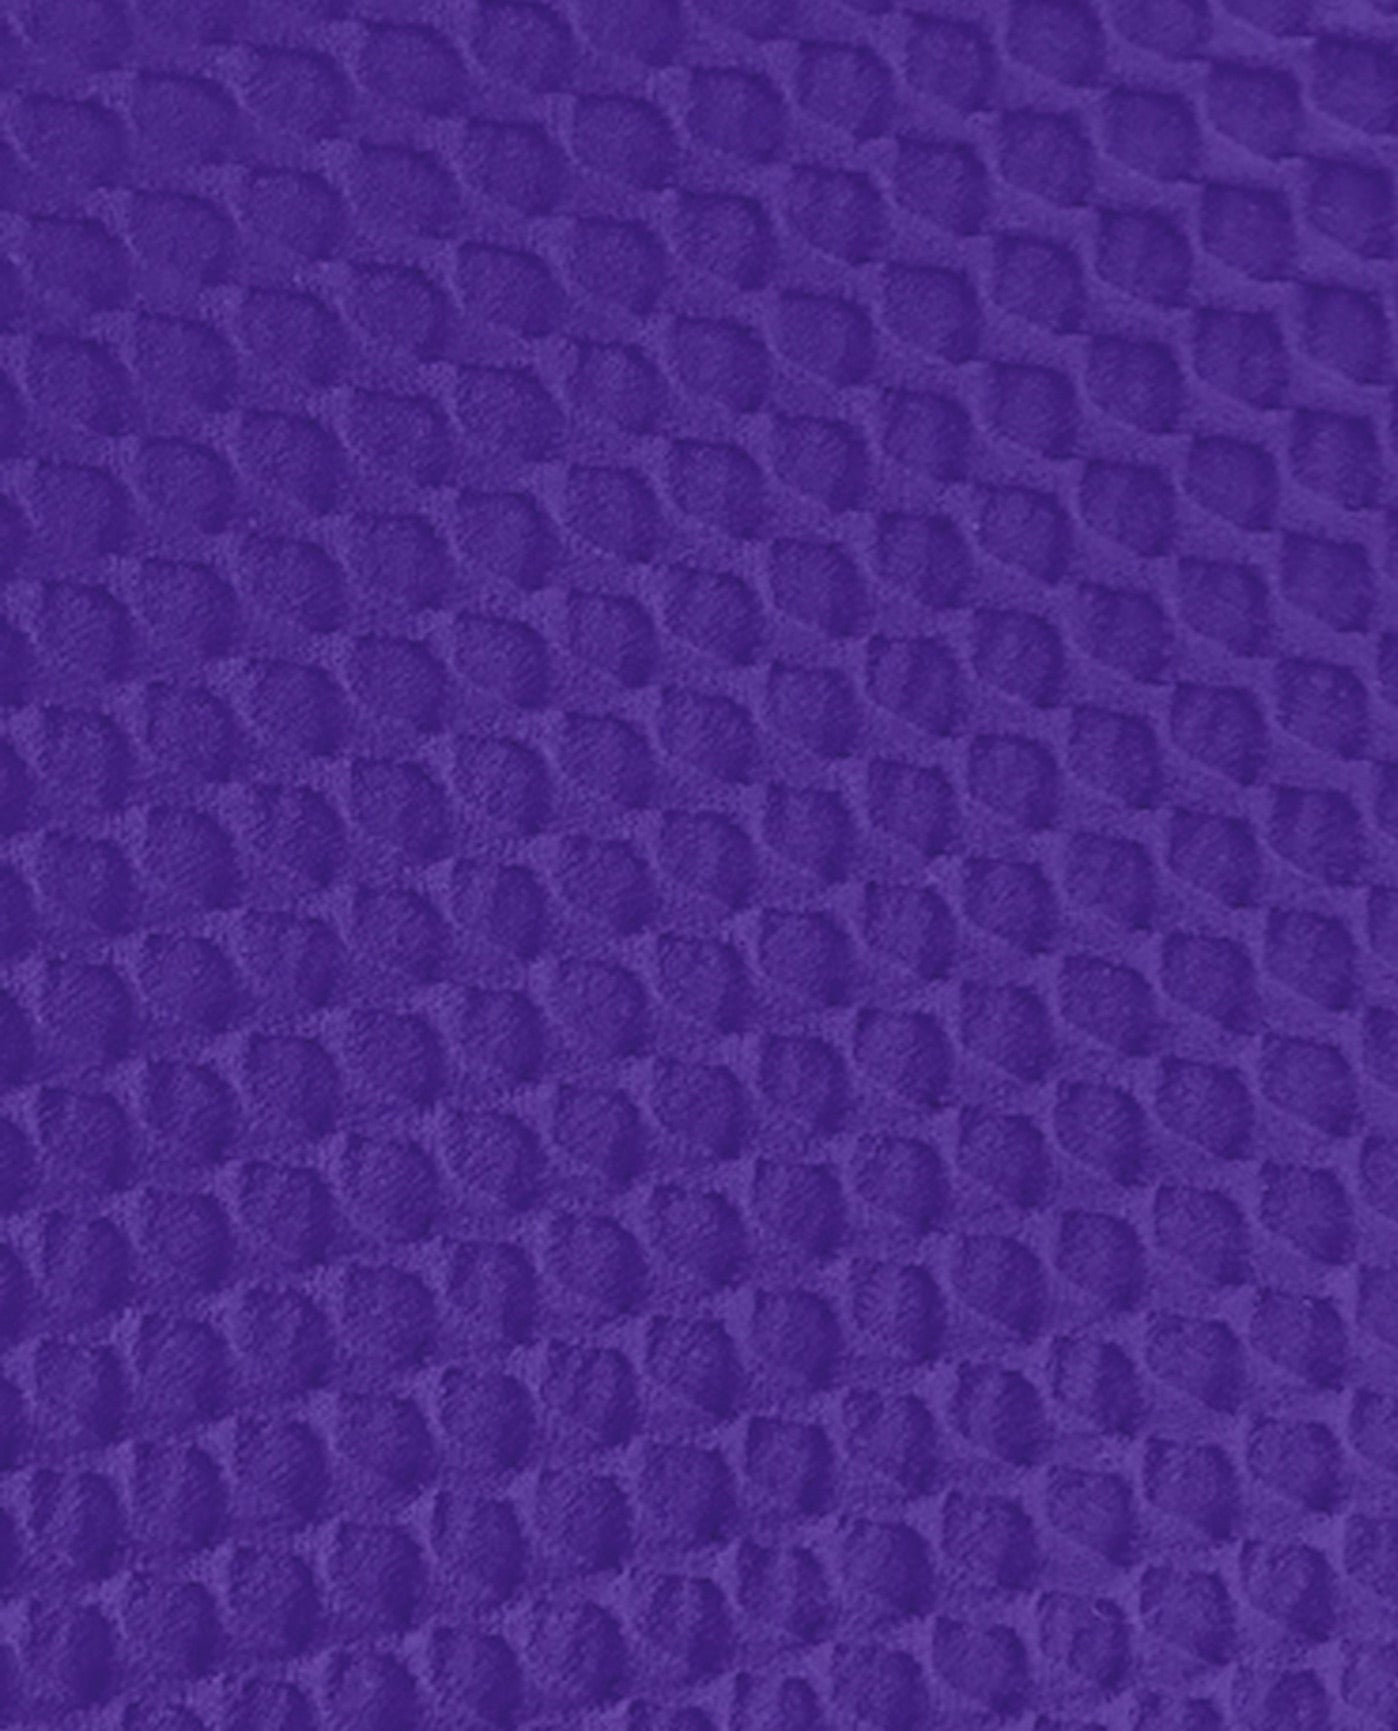 FABRIC SWATCH VIEW OF CHLORINE RESISTANT AQUAMORE SOLID TEXTURED CROSS BACK ONE PIECE SWIMSUIT | 510 AQT TEXTURED PURPLE